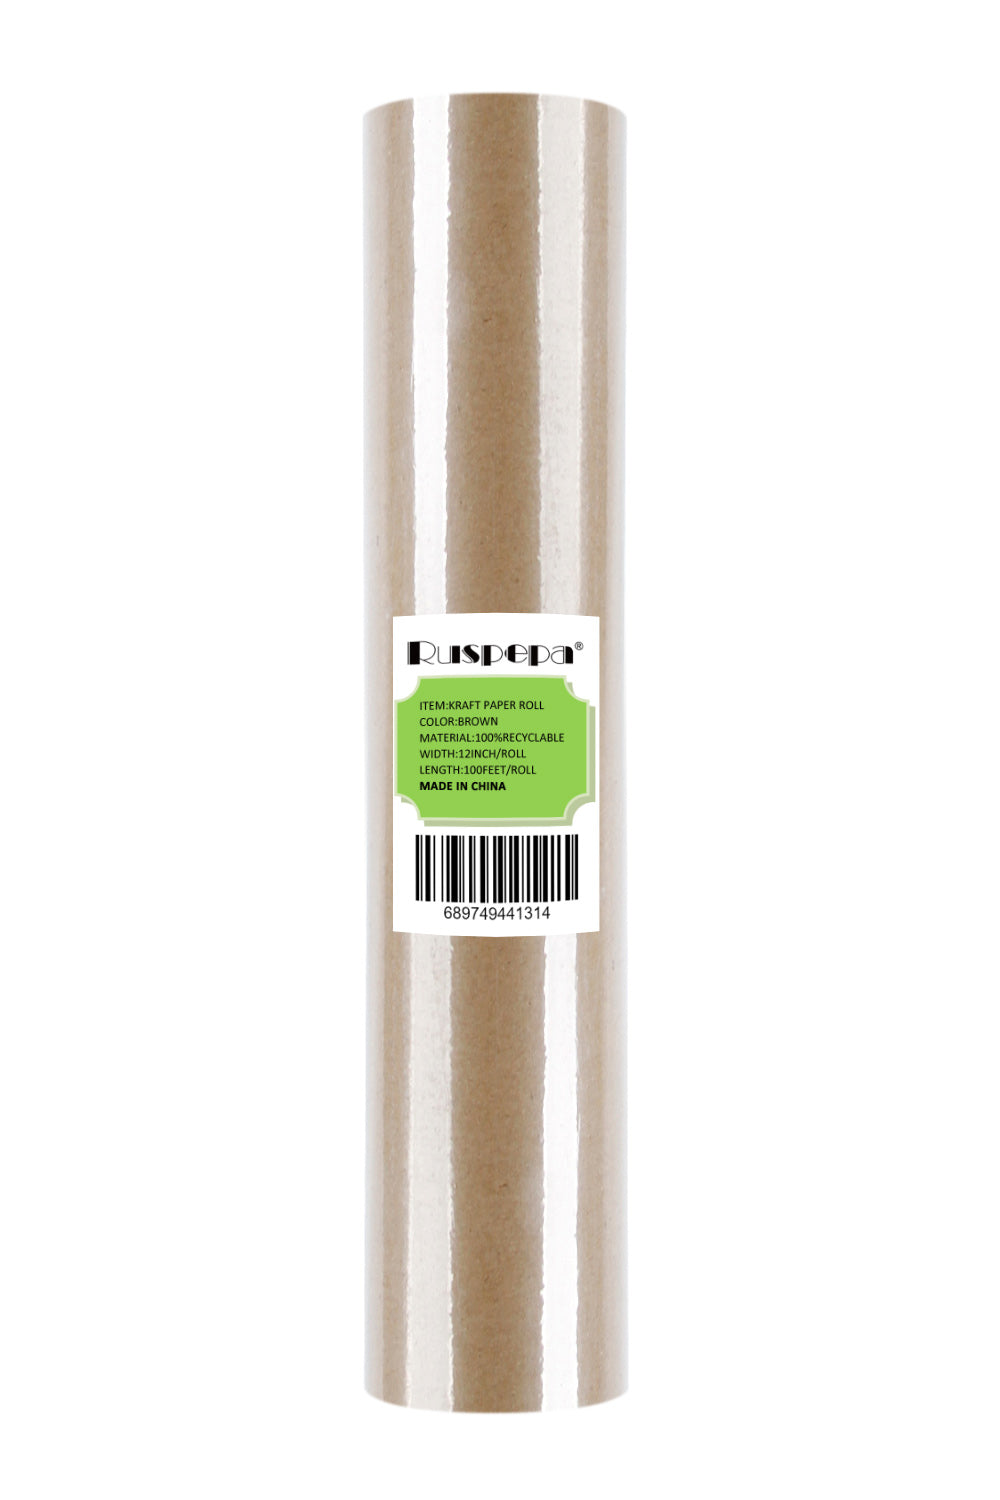 Brown Kraft Paper Roll - 12 inch x 100 Feet - Natural Recycled